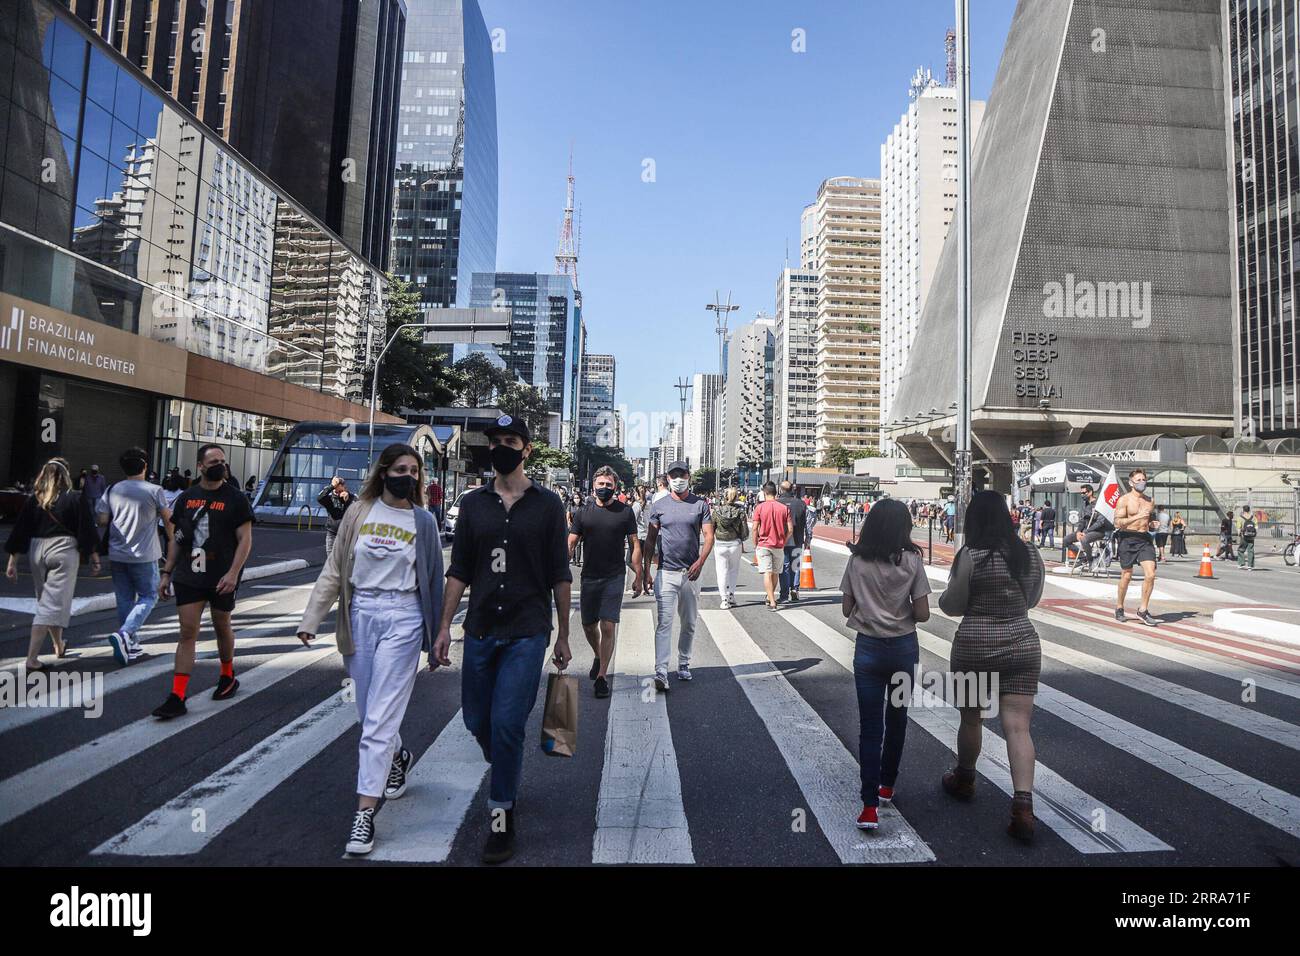 210719 -- SAO PAULO, July 19, 2021 -- Pedestrians walk at Paulista Avenue  amid COVID-19 outbreak in Sao Paulo, Brazil on July 18, 2021. The city on  Sunday reopened the pedestrian promenade